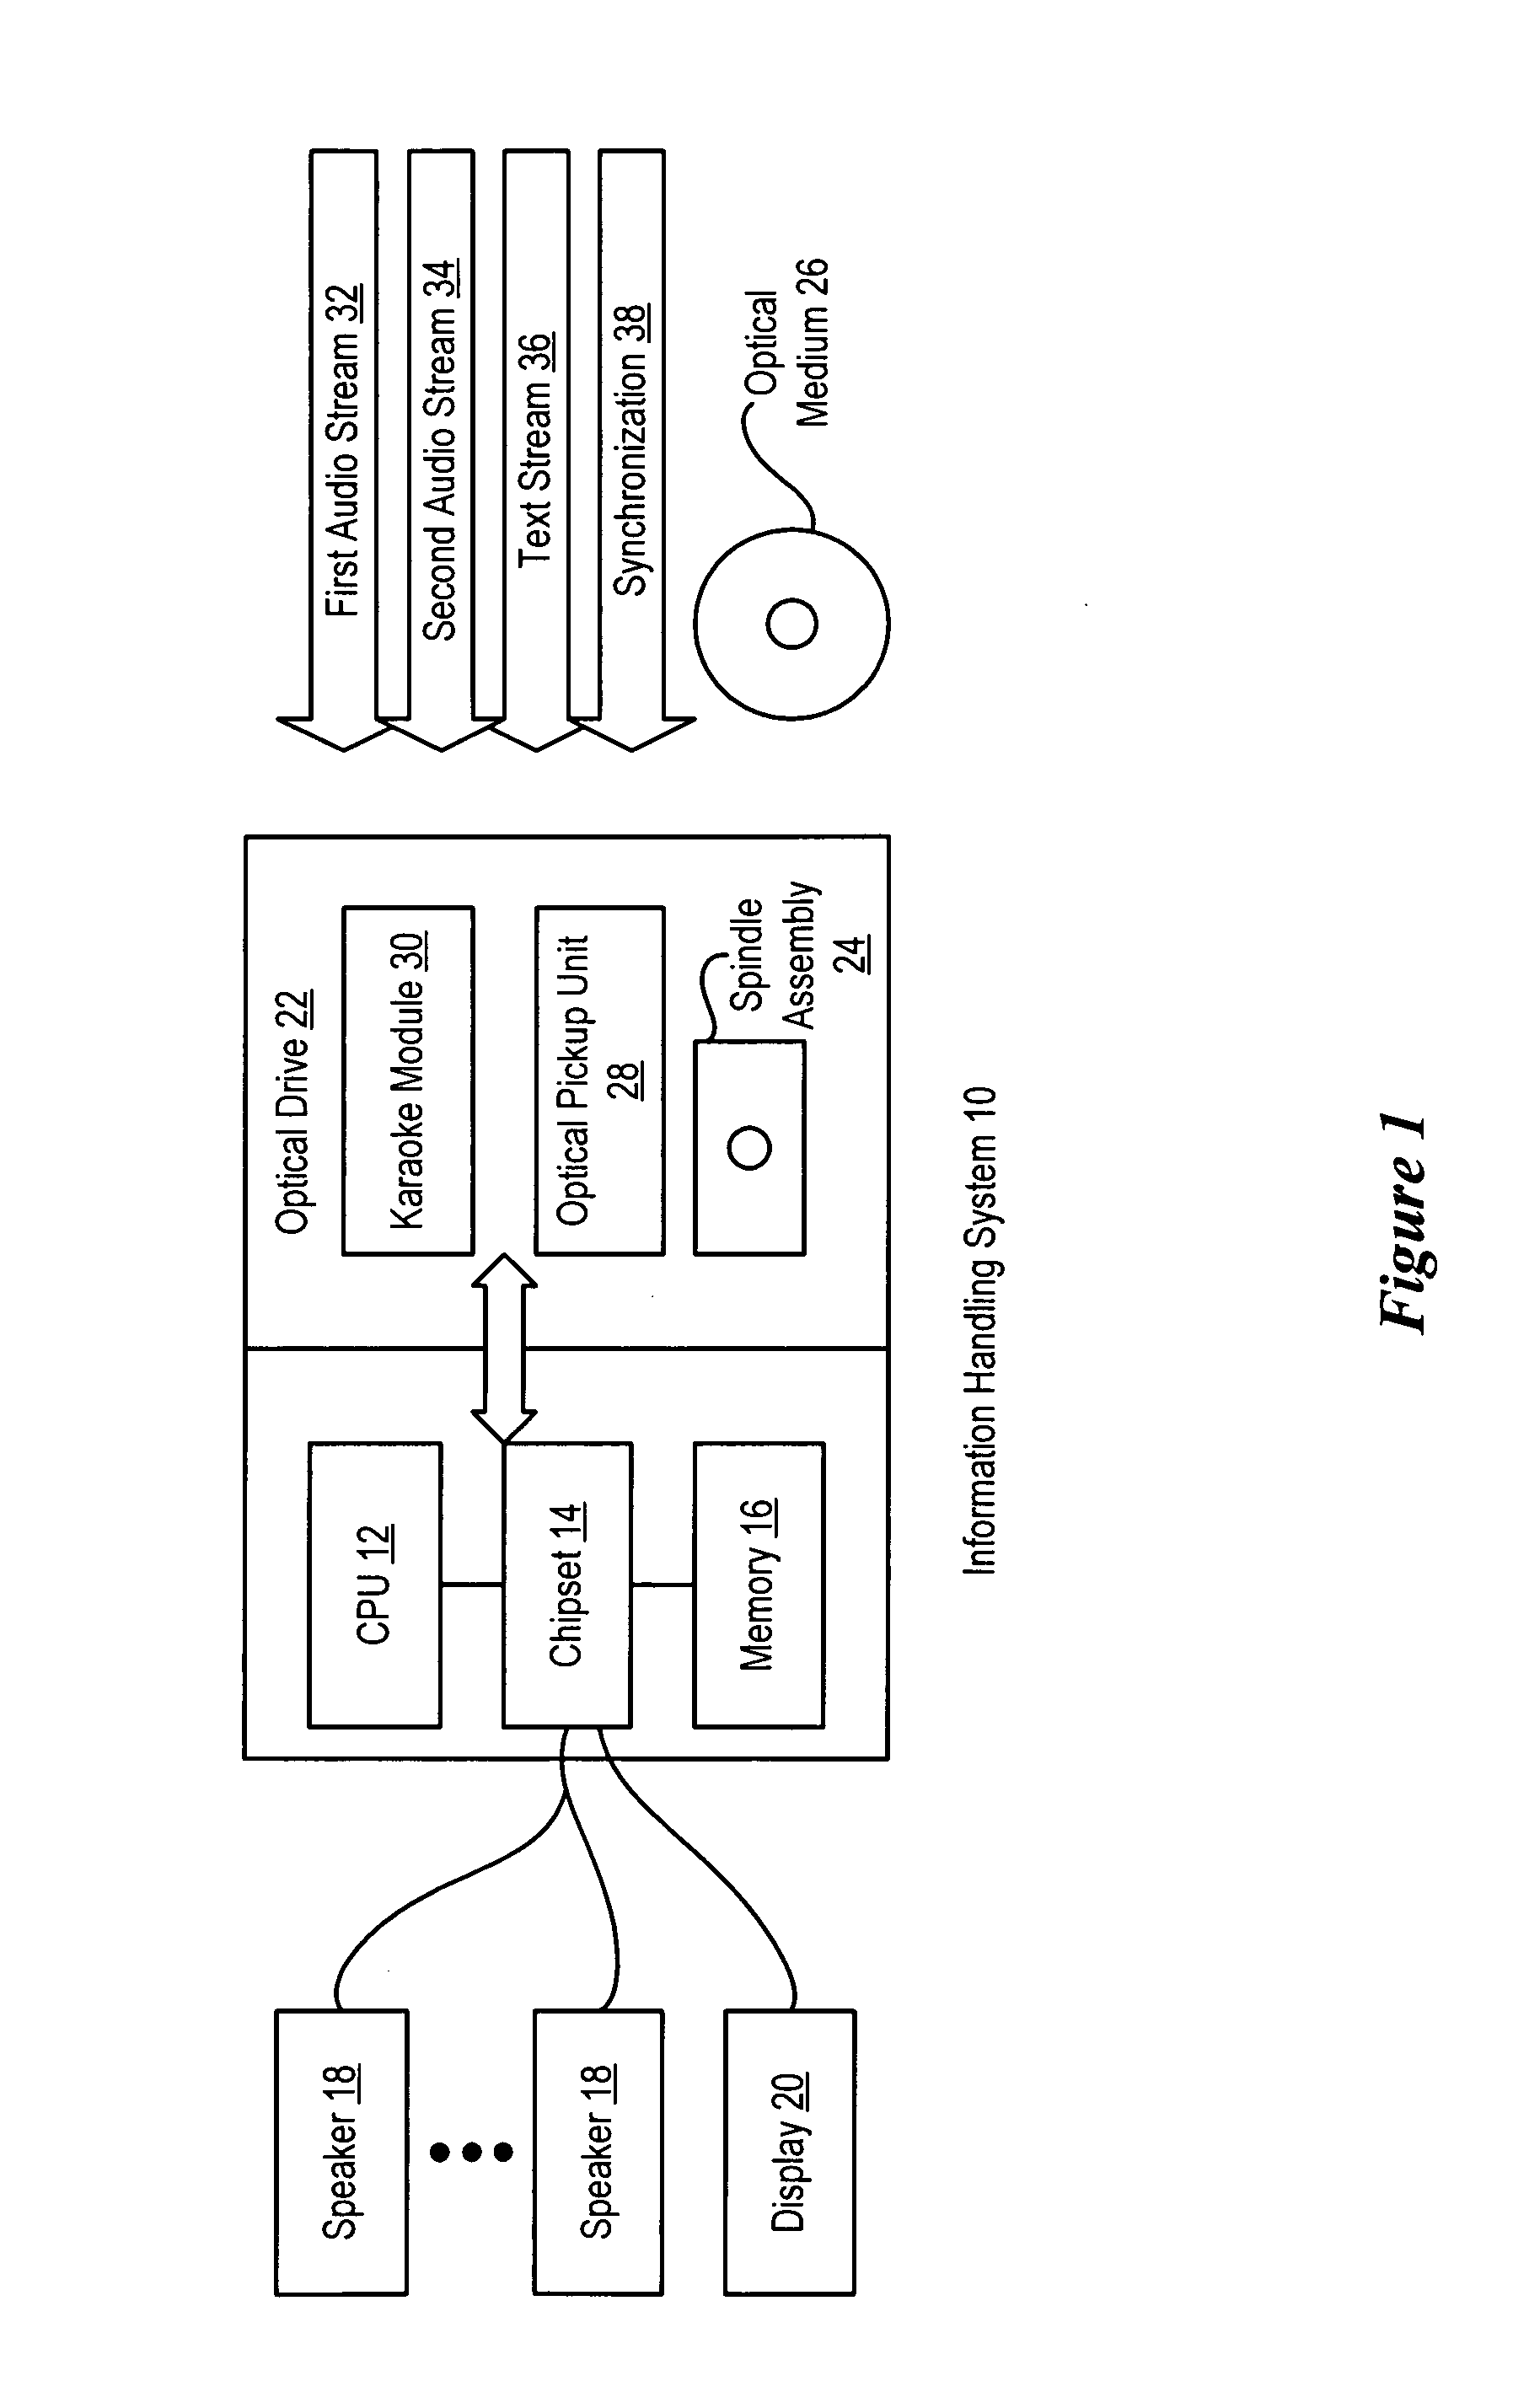 System and method for presenting karaoke audio features from an optical medium